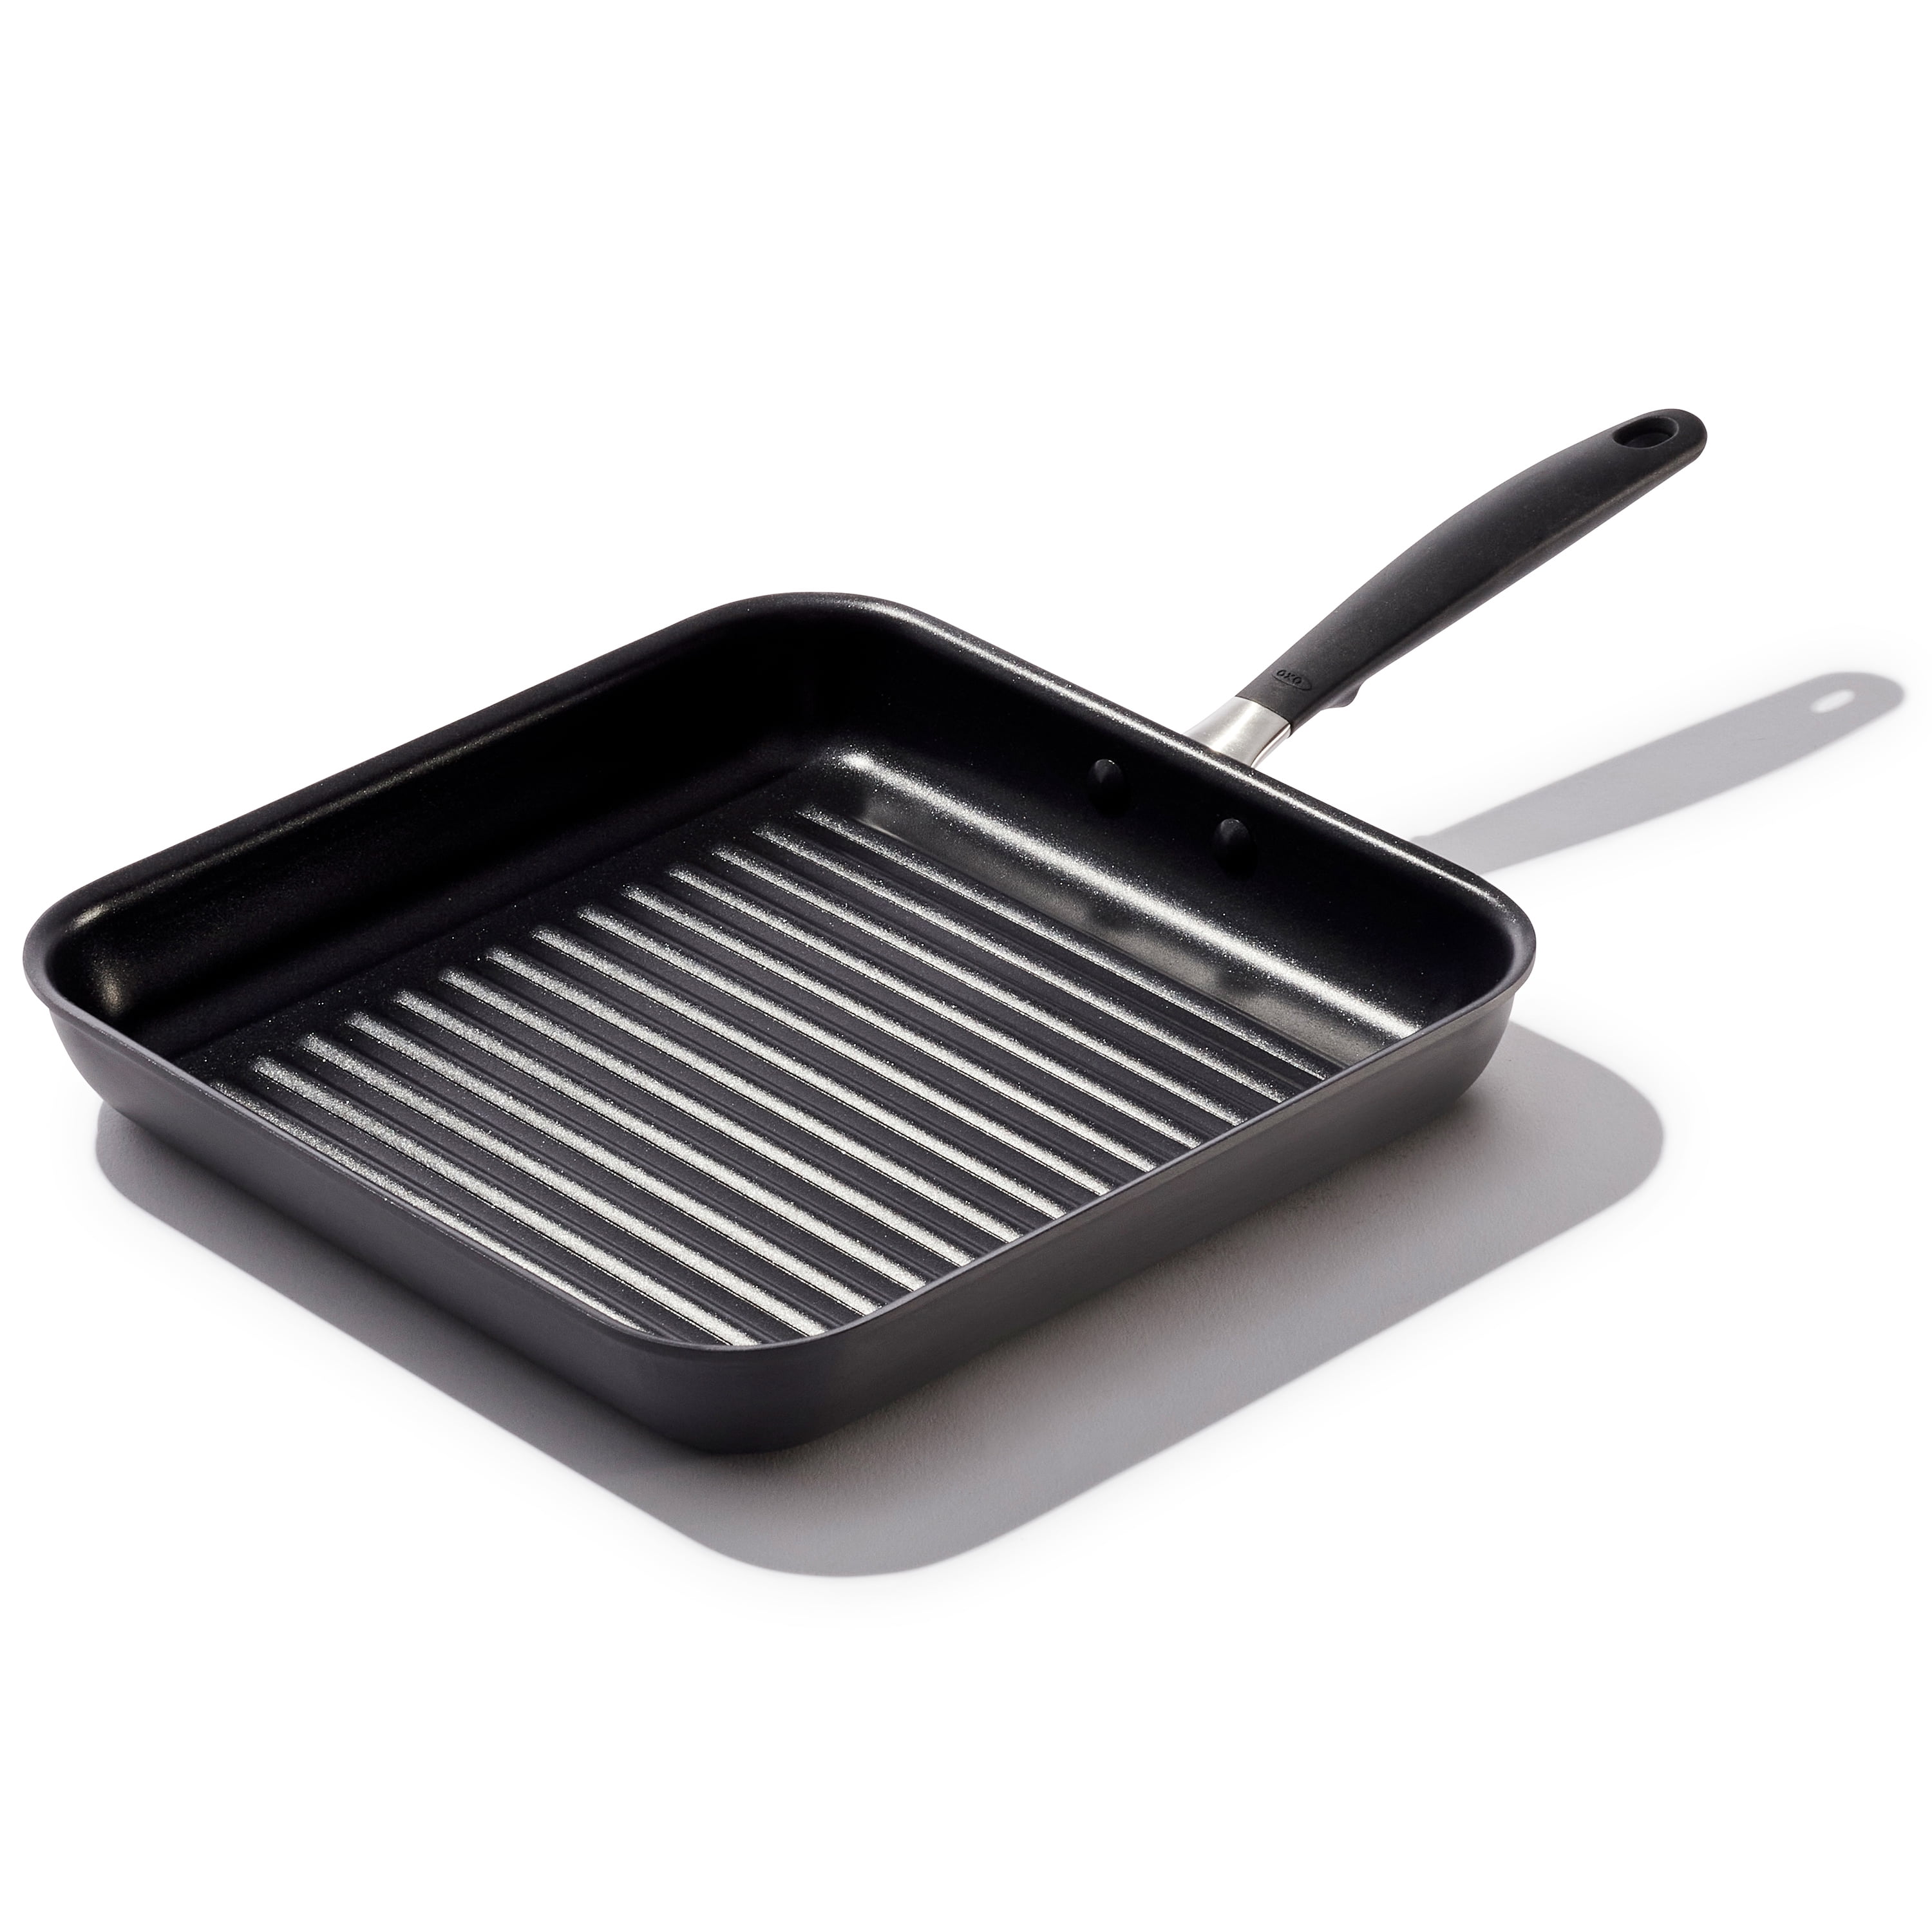 11 x 11-Inch Cooks Standard Hard Anodized Nonstick Square Grill Pan Black 